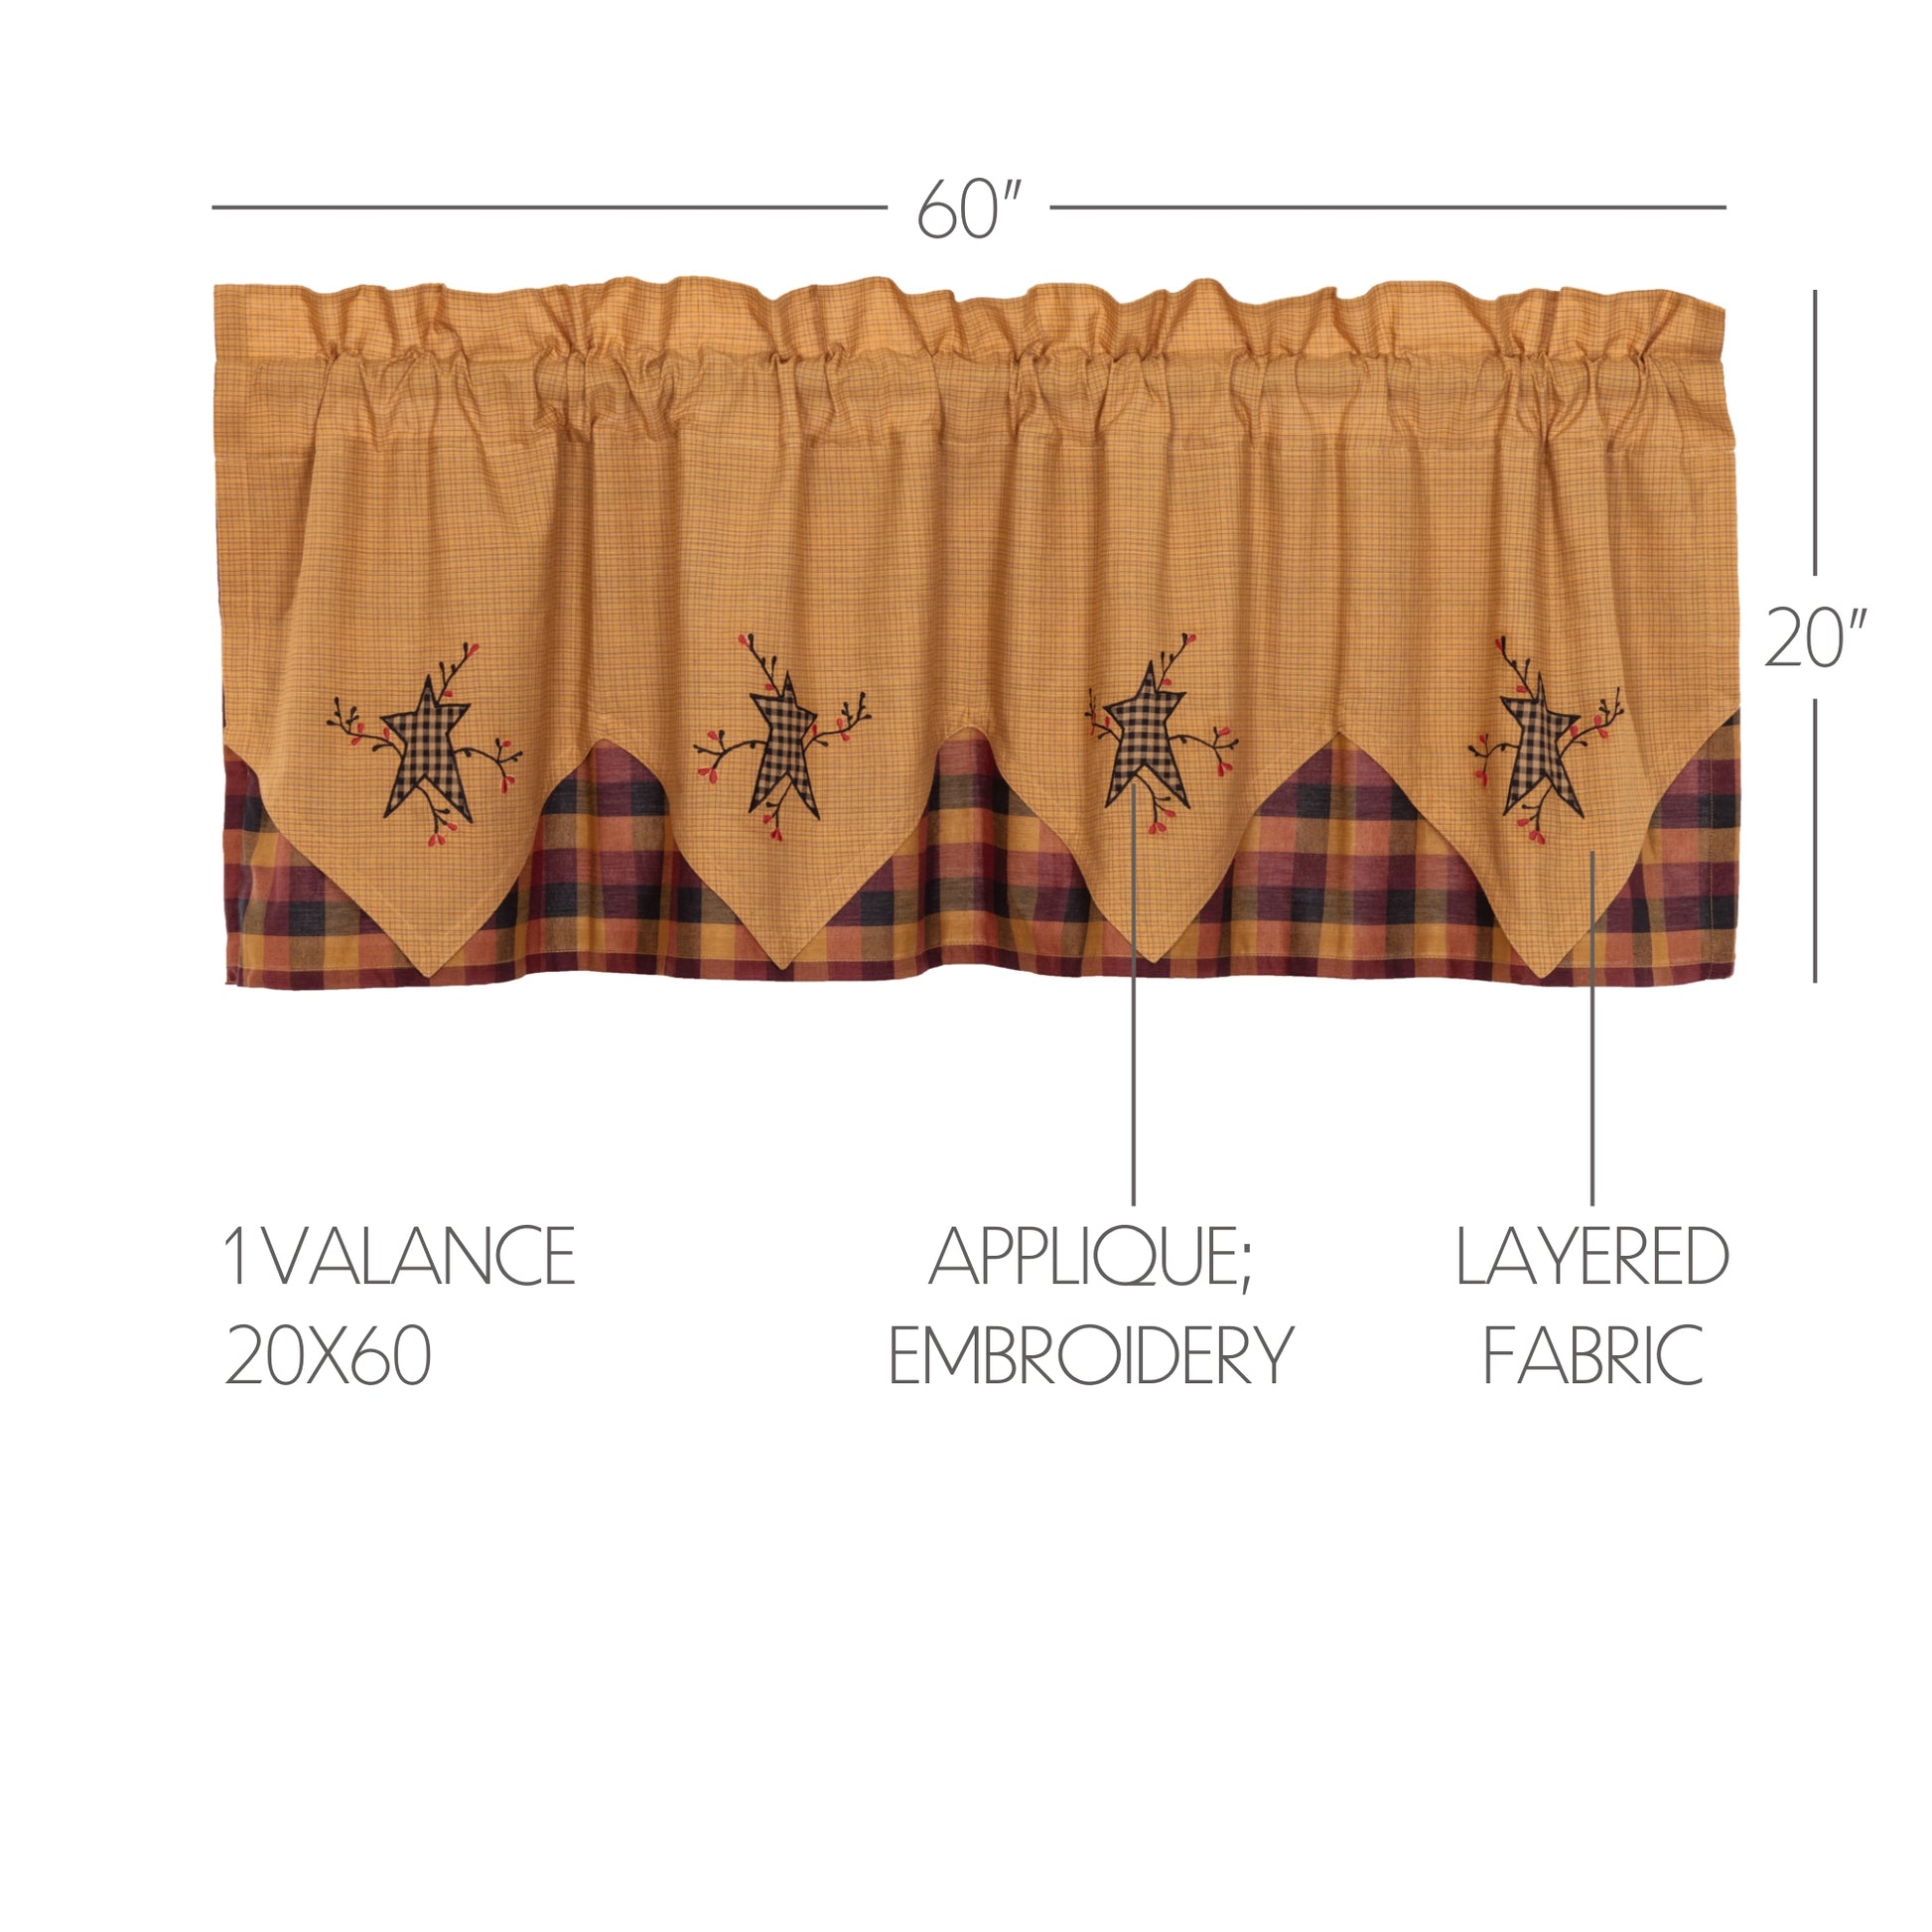 51877-Heritage-Farms-Primitive-Star-and-Pip-Valance-Layered-20x60-image-1